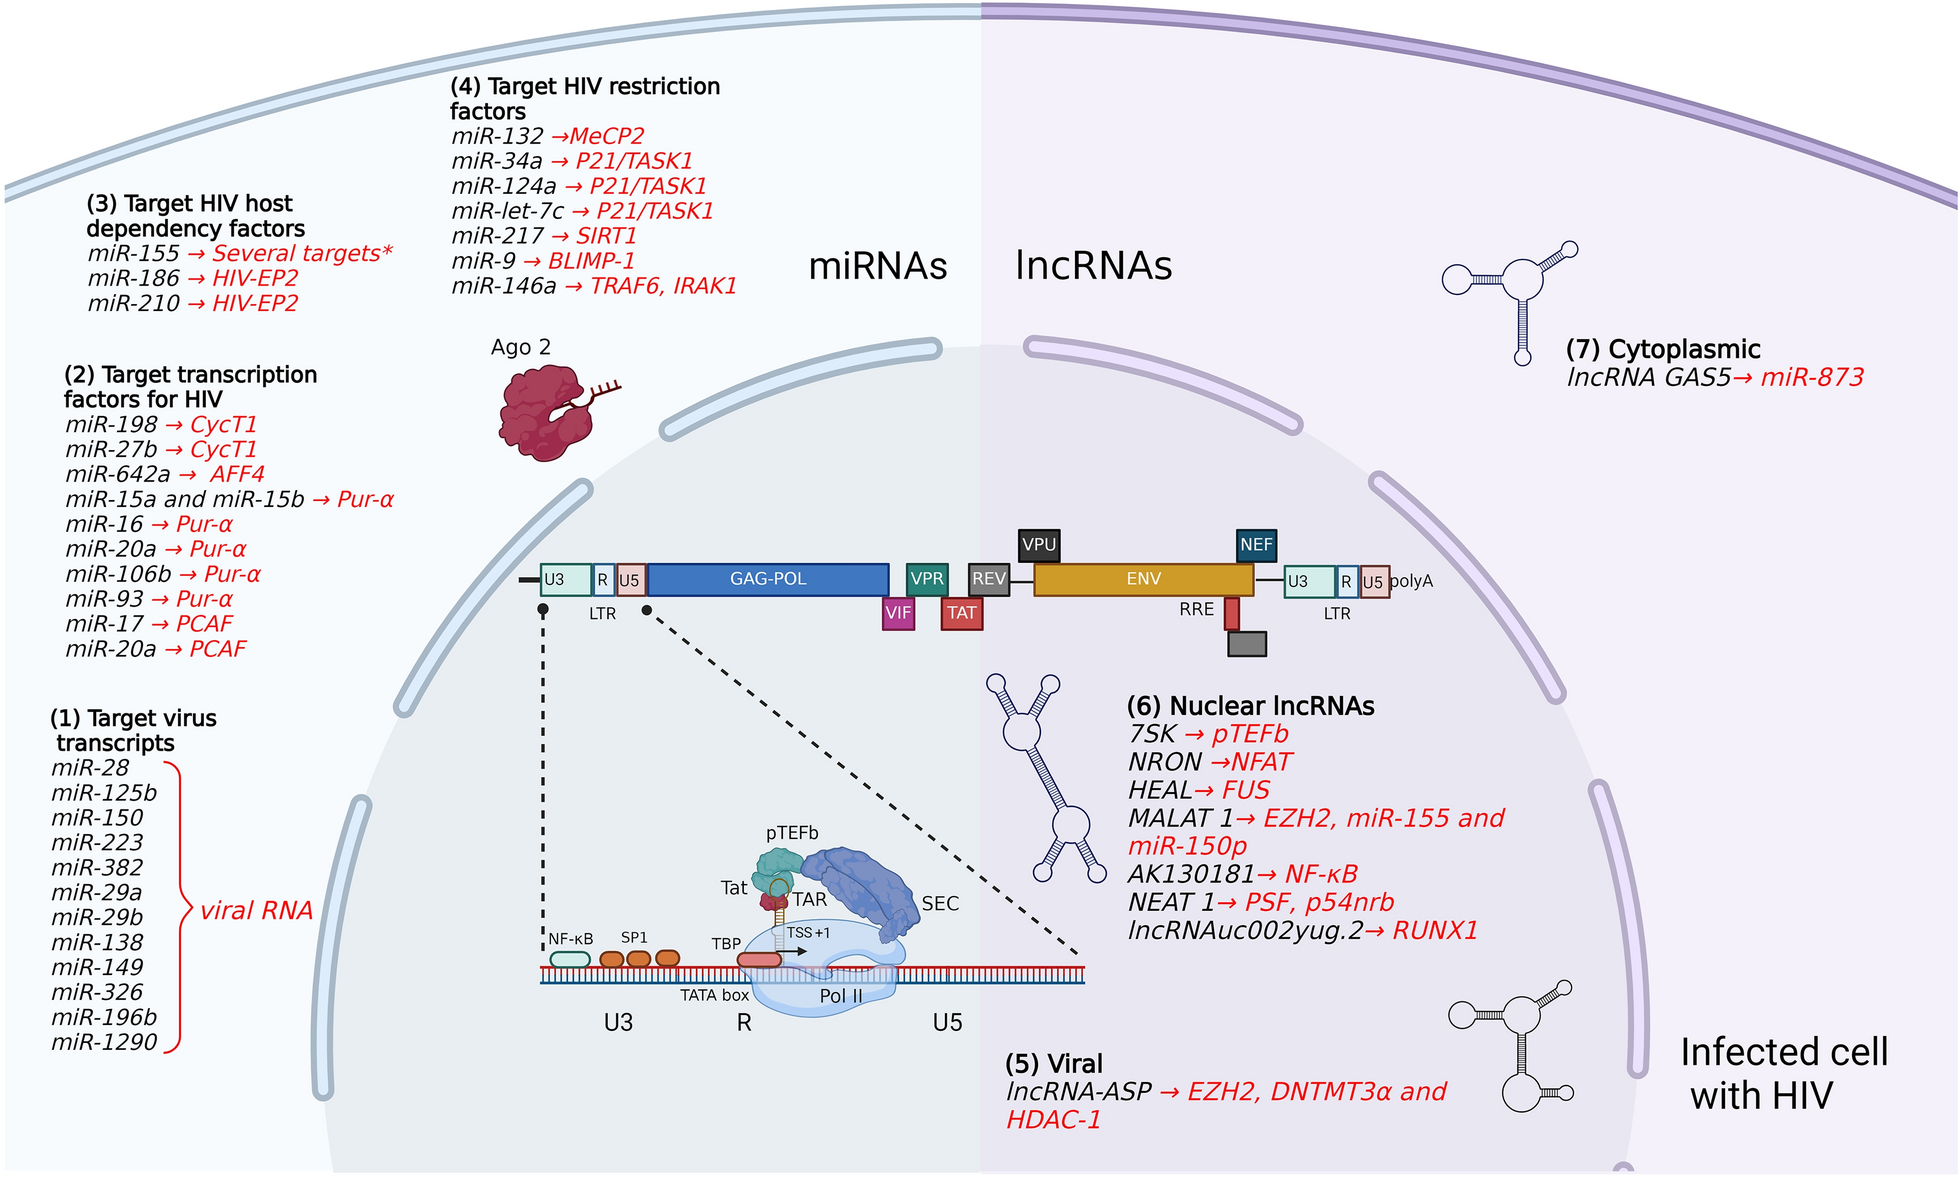 MicroRNAs and long non-coding RNAs during transcriptional regulation and latency of HIV and HTLV